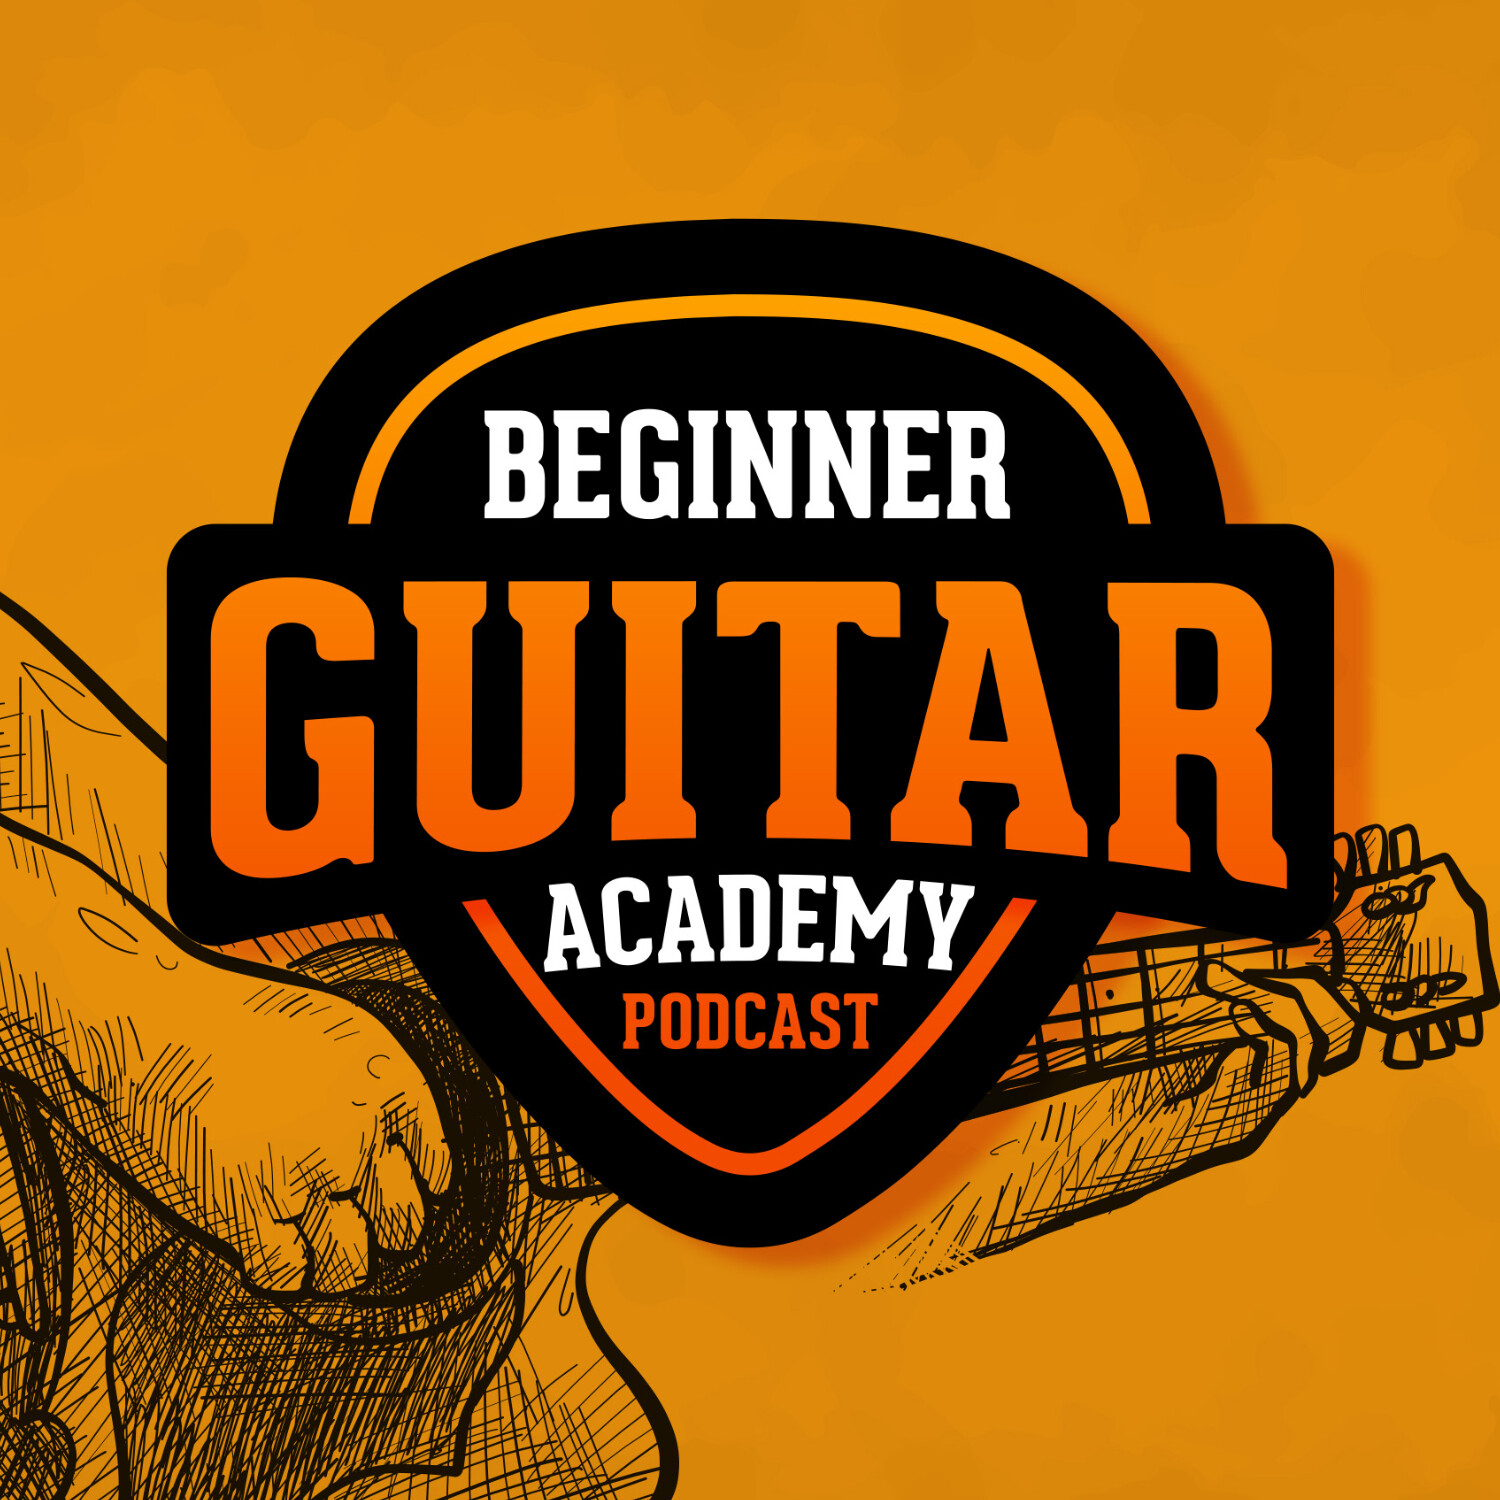 004 - 7 Things Every Beginner NEEDS to Learn Guitar at Home